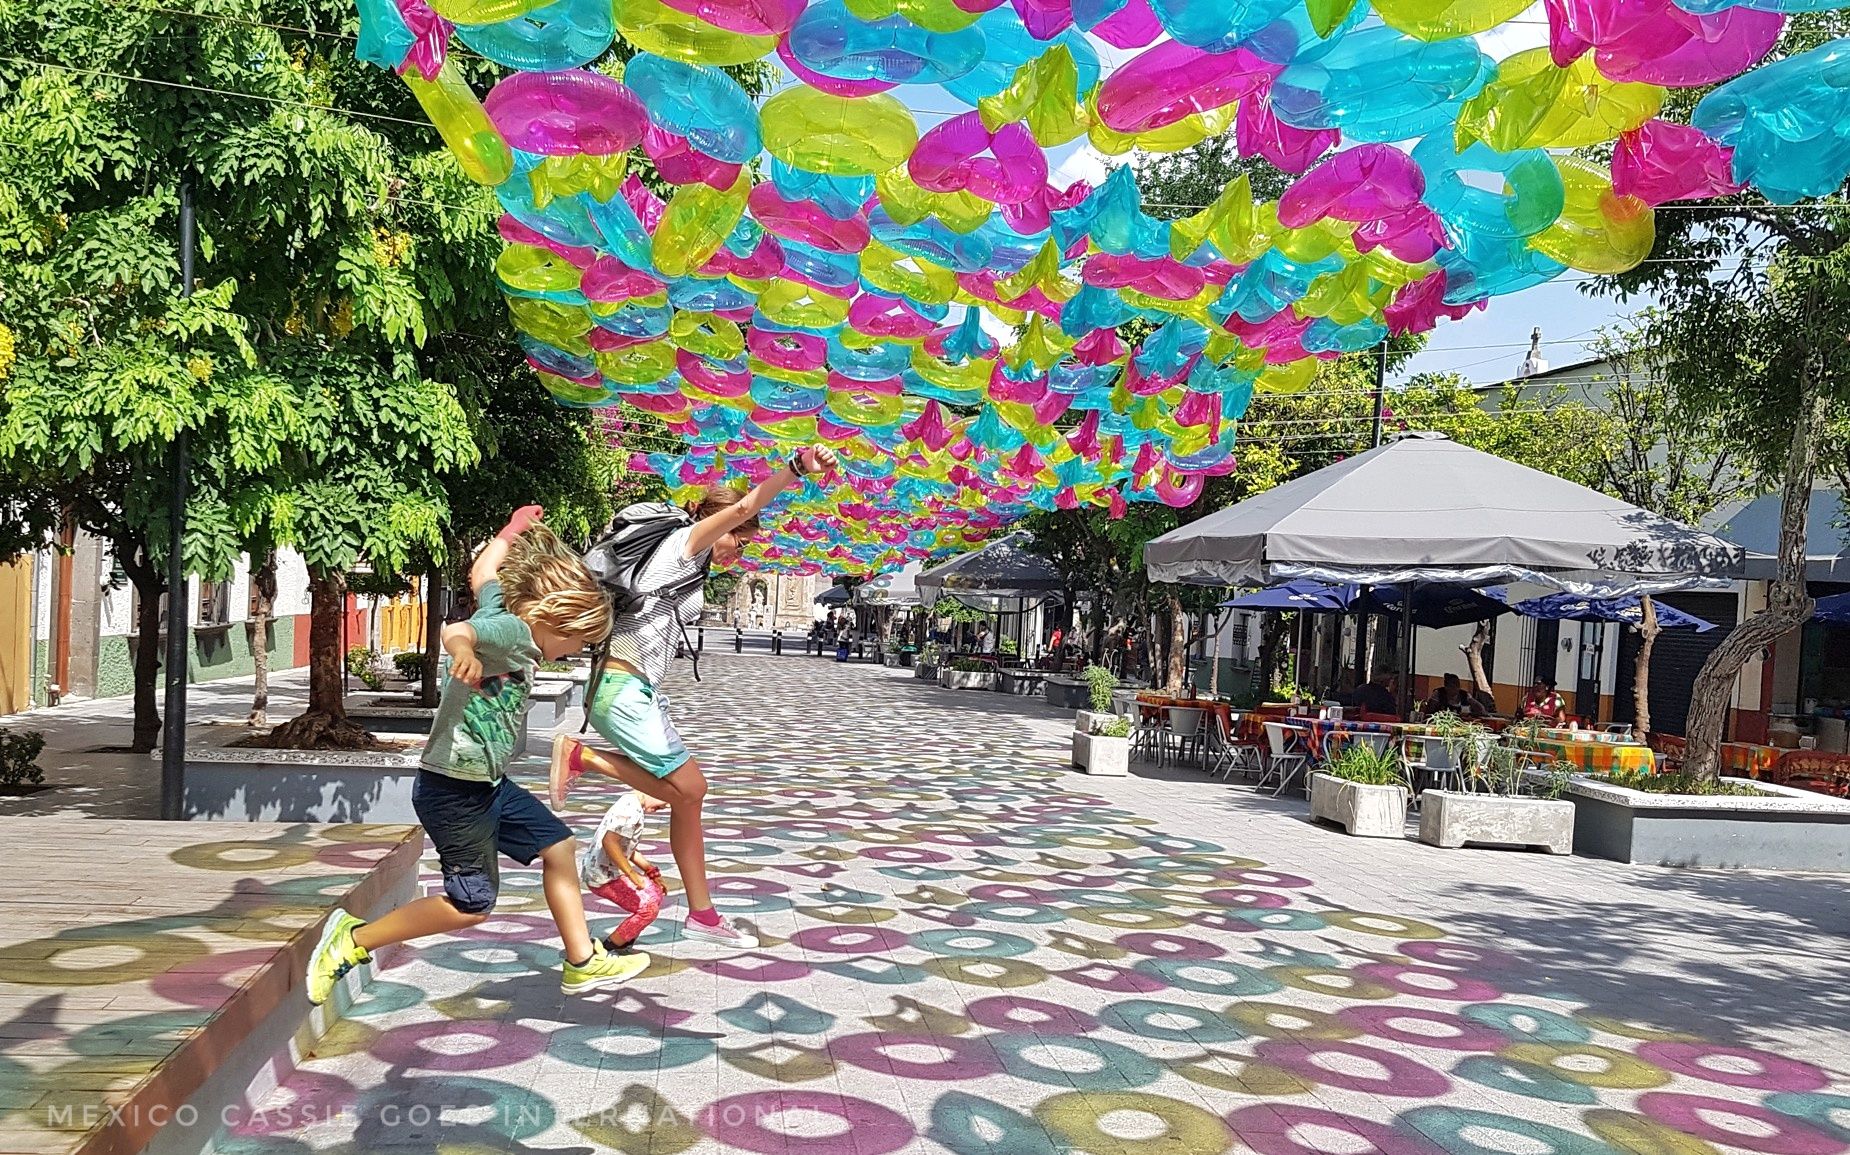 adult and two kids jumping into road - road is covered with inflatable rings (blue, yellow, pink), that cast colourful shadows on the ground